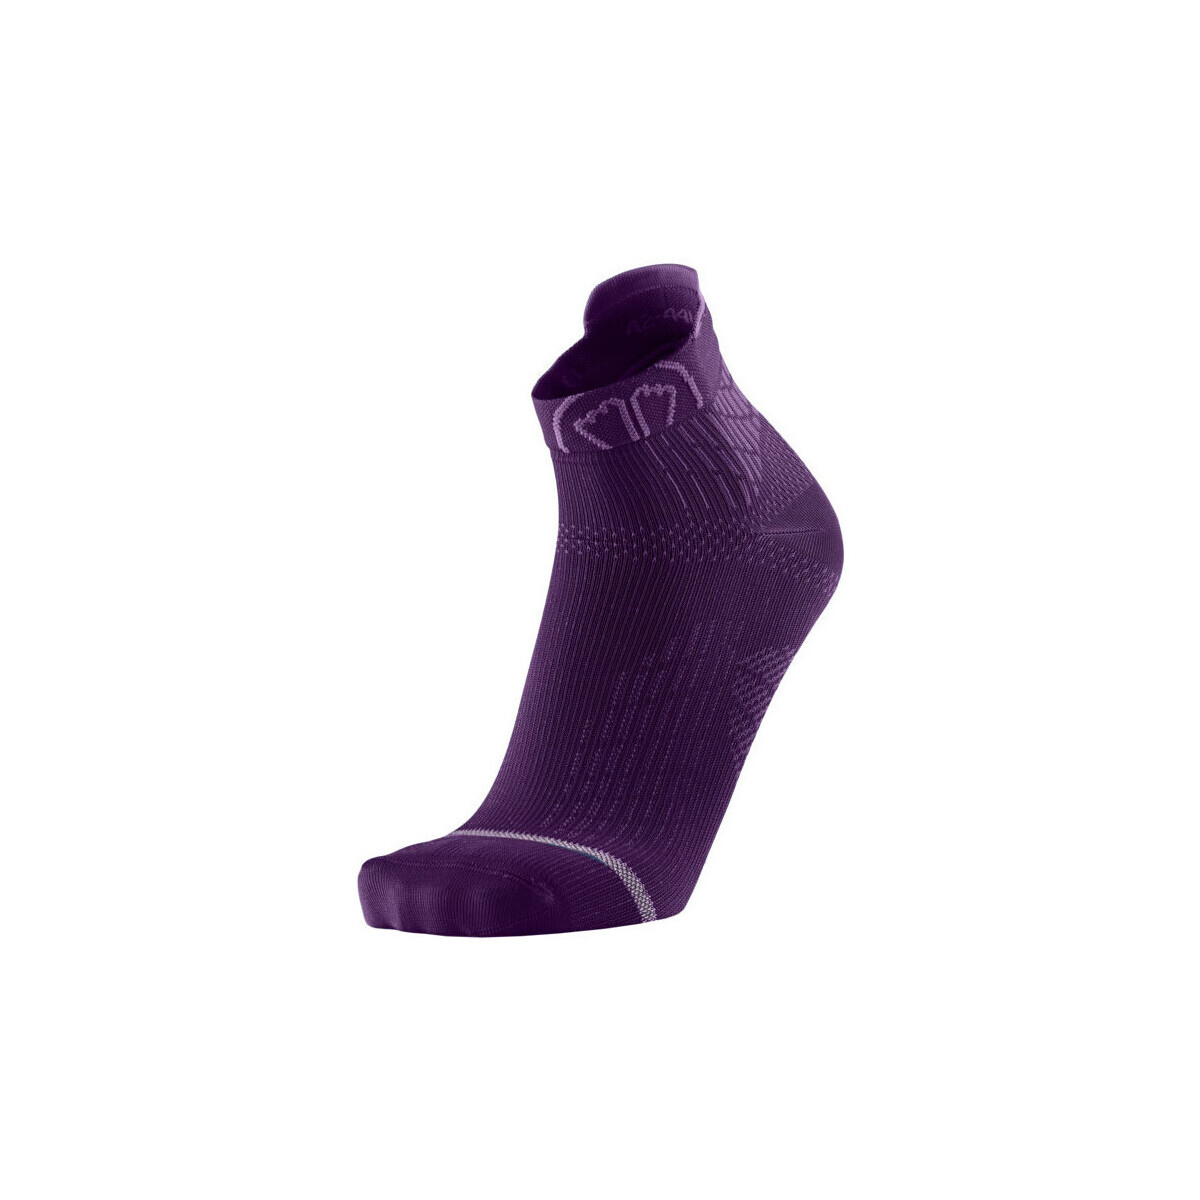 Sidas Violet Chaussettes Run Anatomic Ankle Lady RBrx57